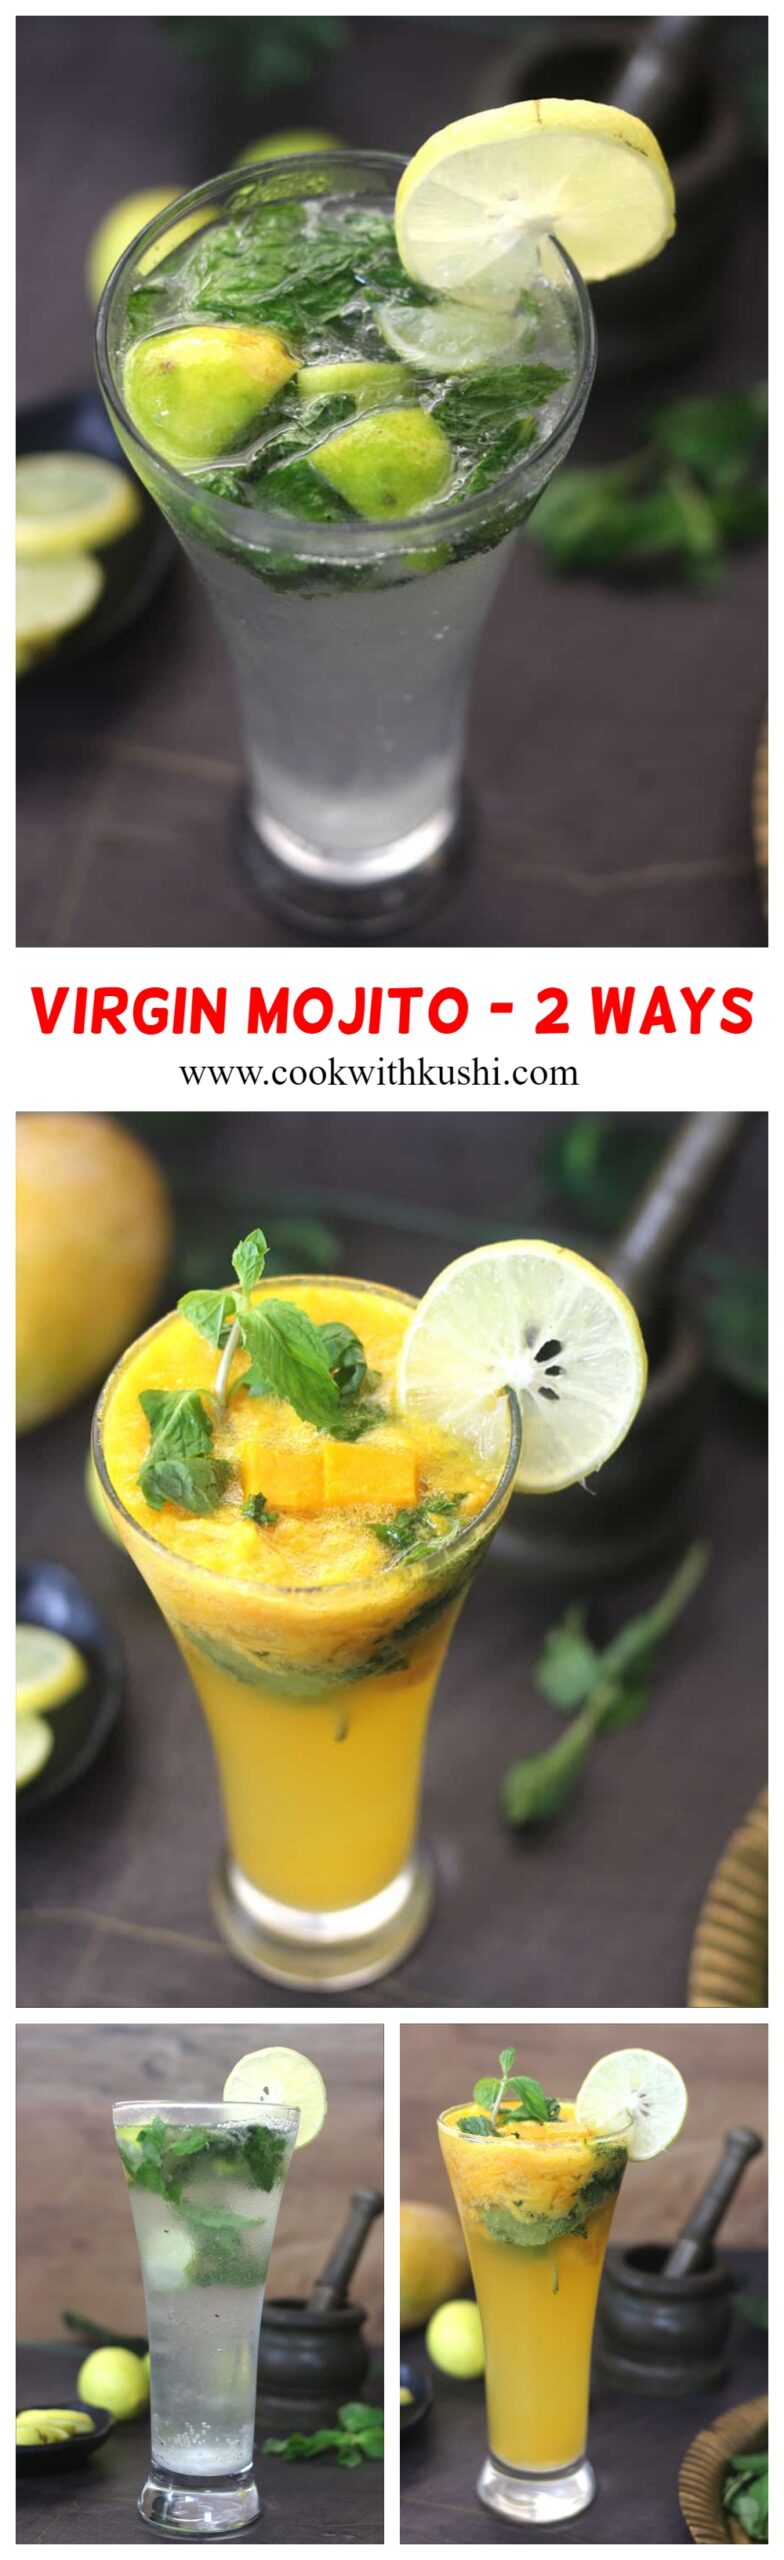 How to make classic virgin mojito #classicdrink #summerdrink #Partydrink